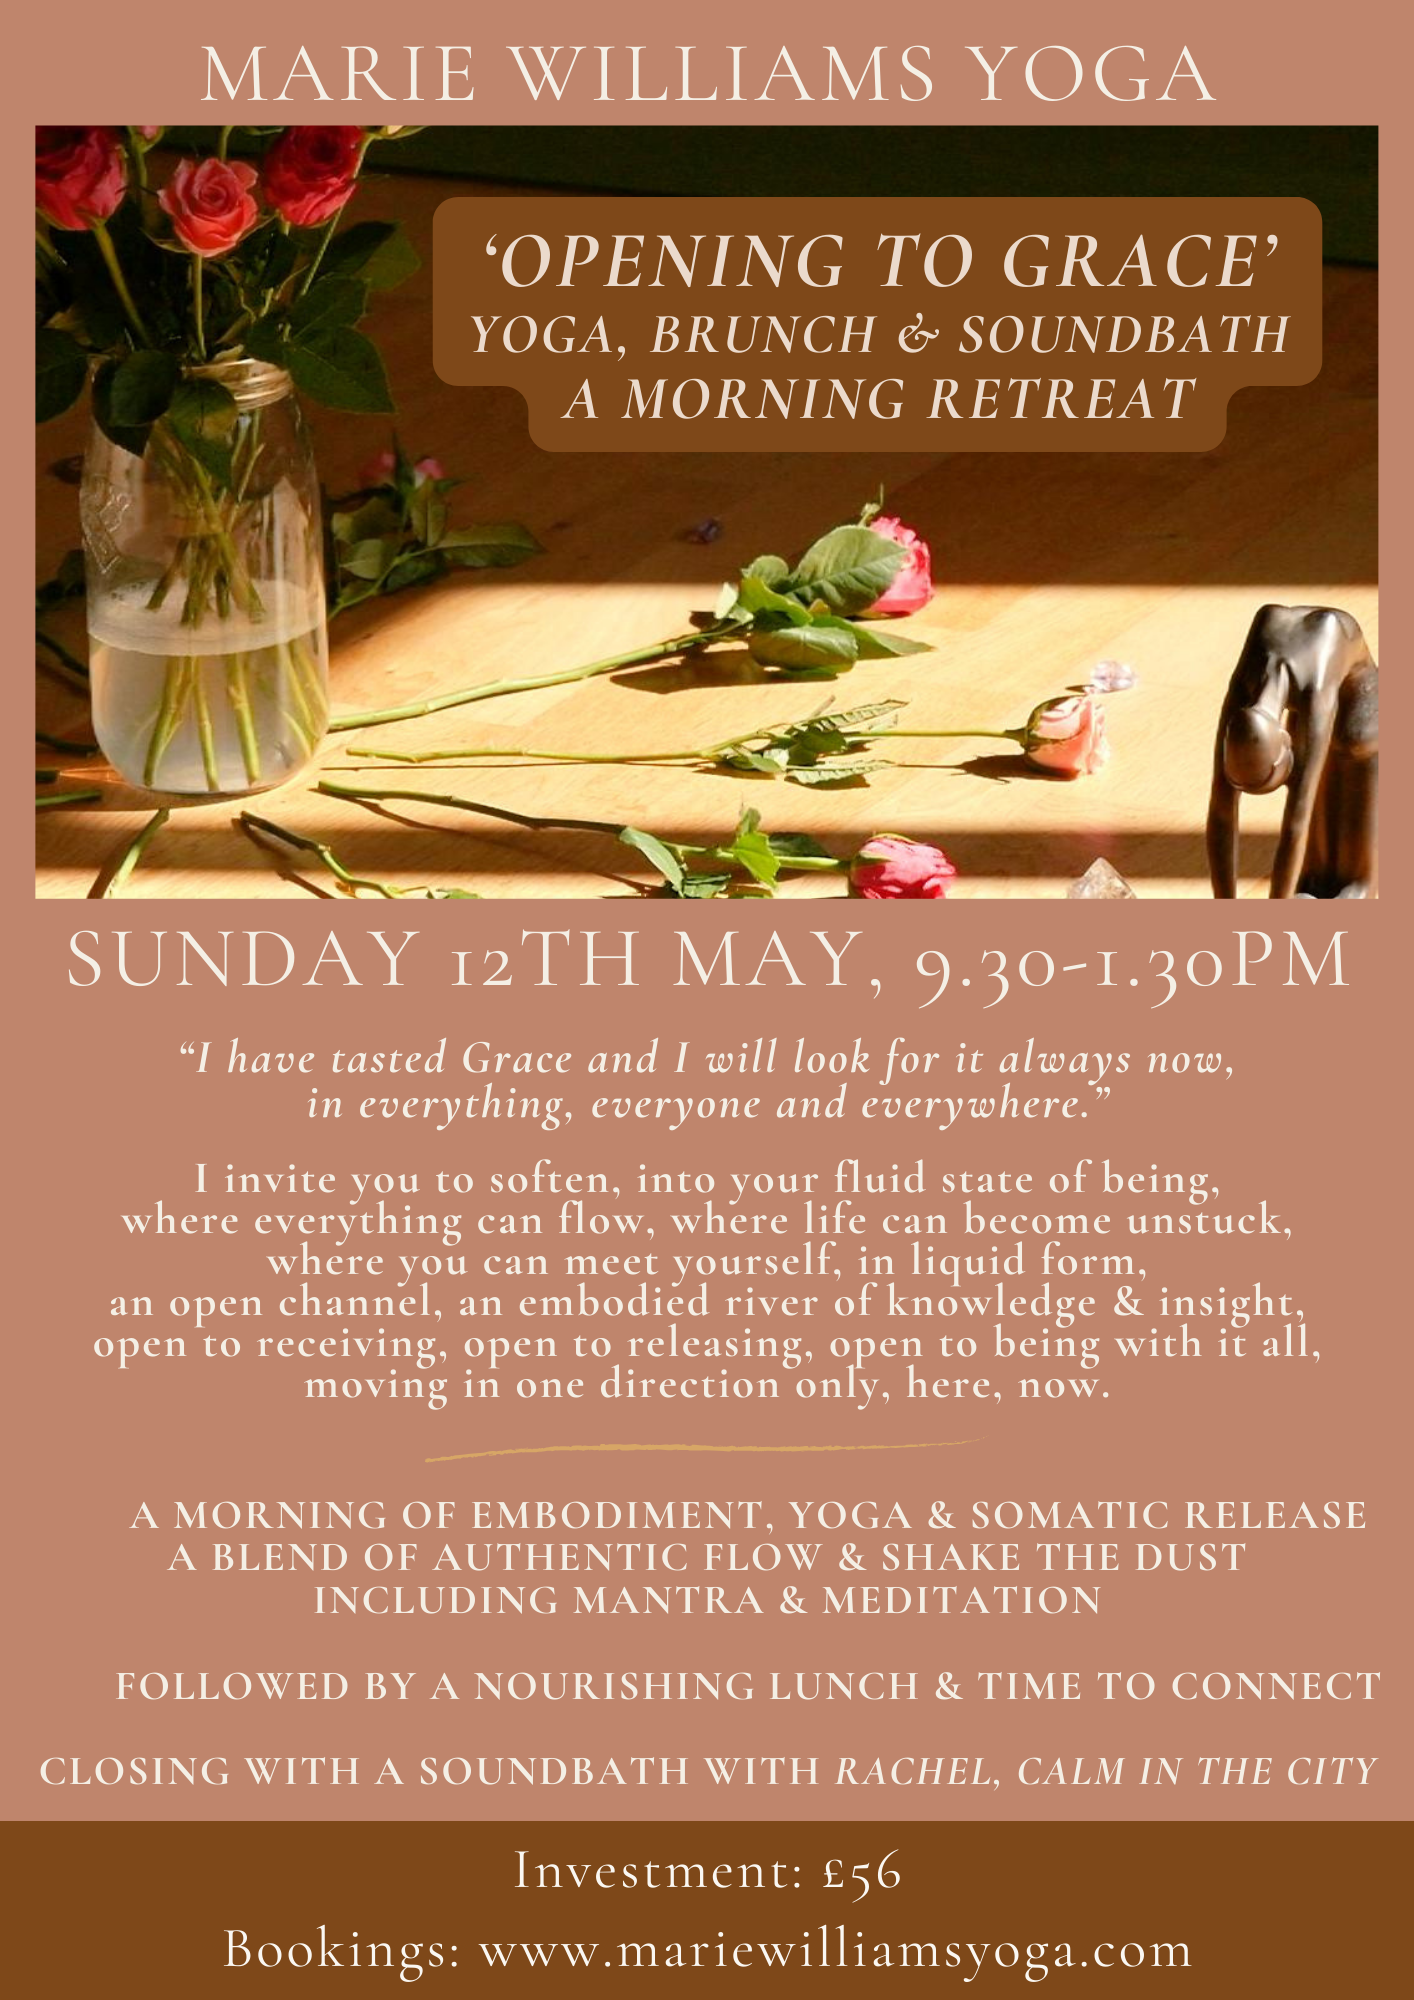 'Opening to Grace' -May Morning Retreat, Yoga & Brunch